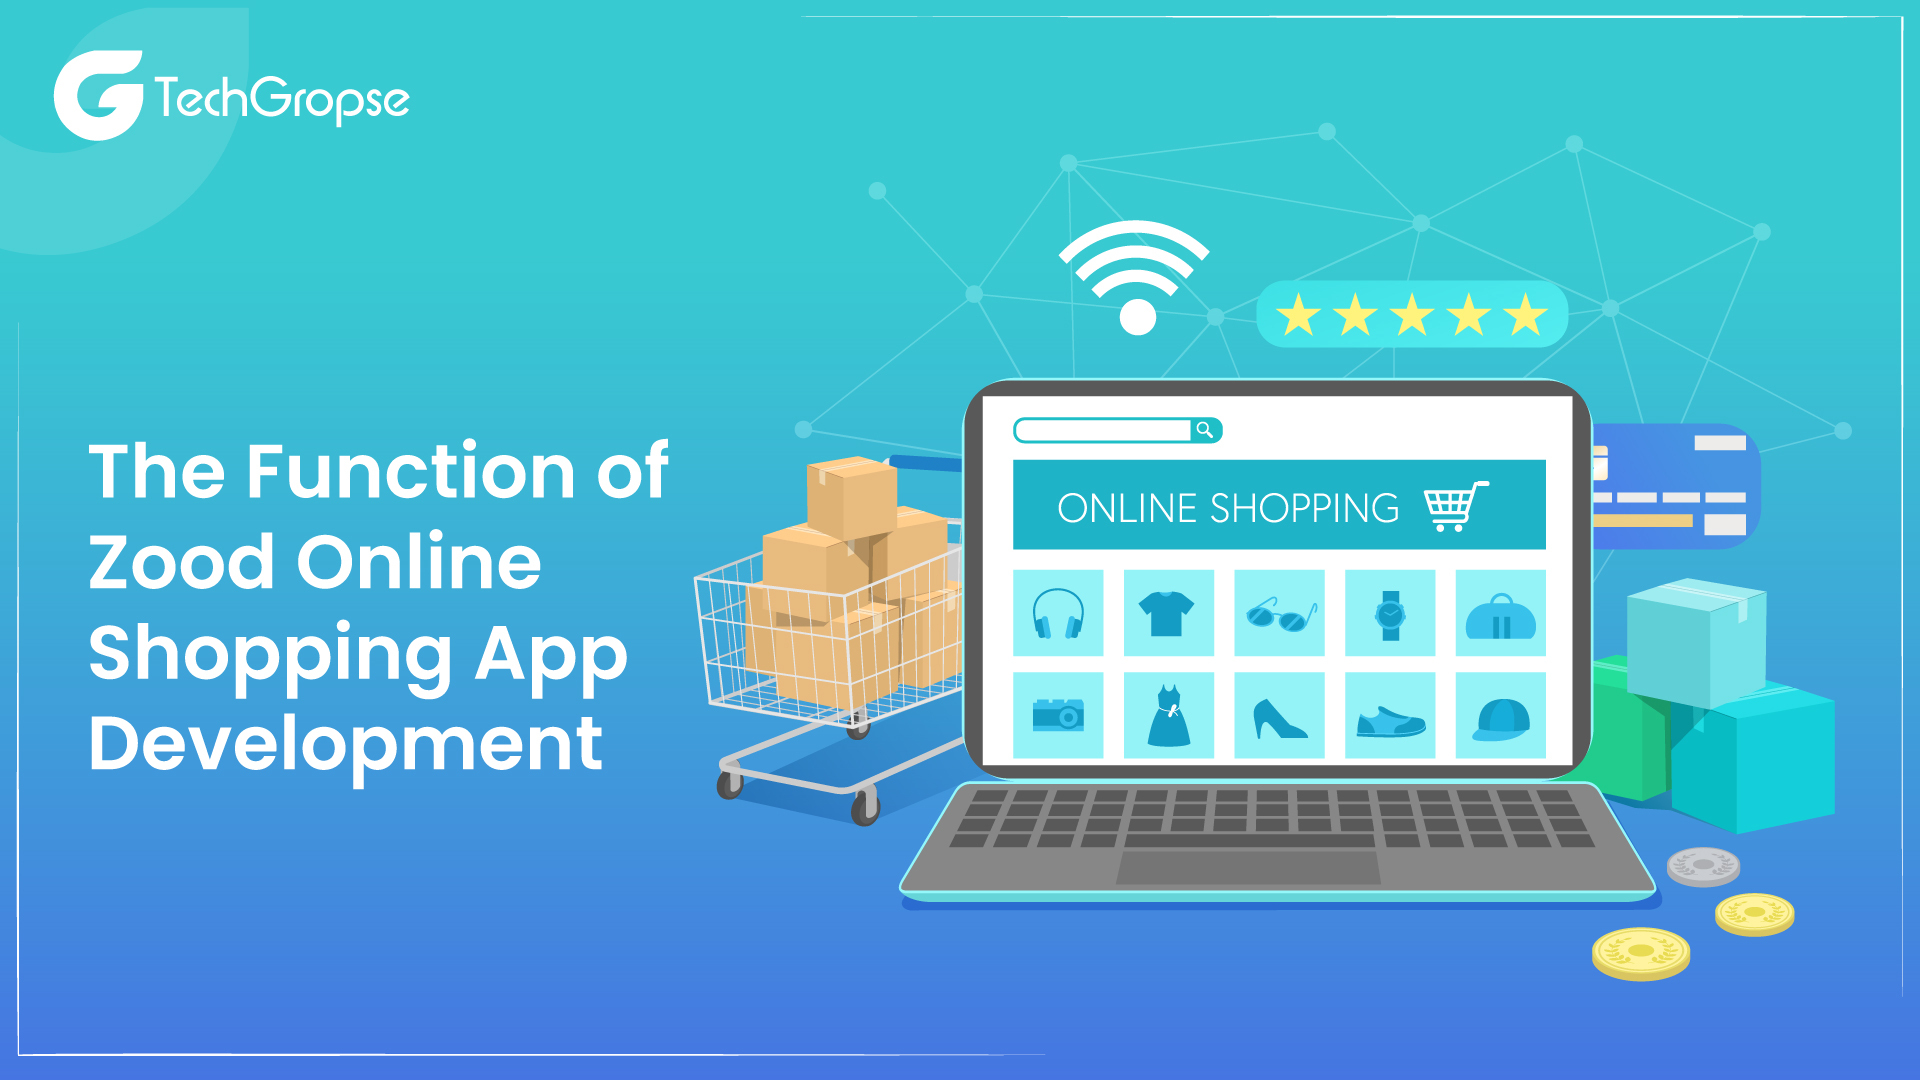 The Function of Zood Online Shopping App Development